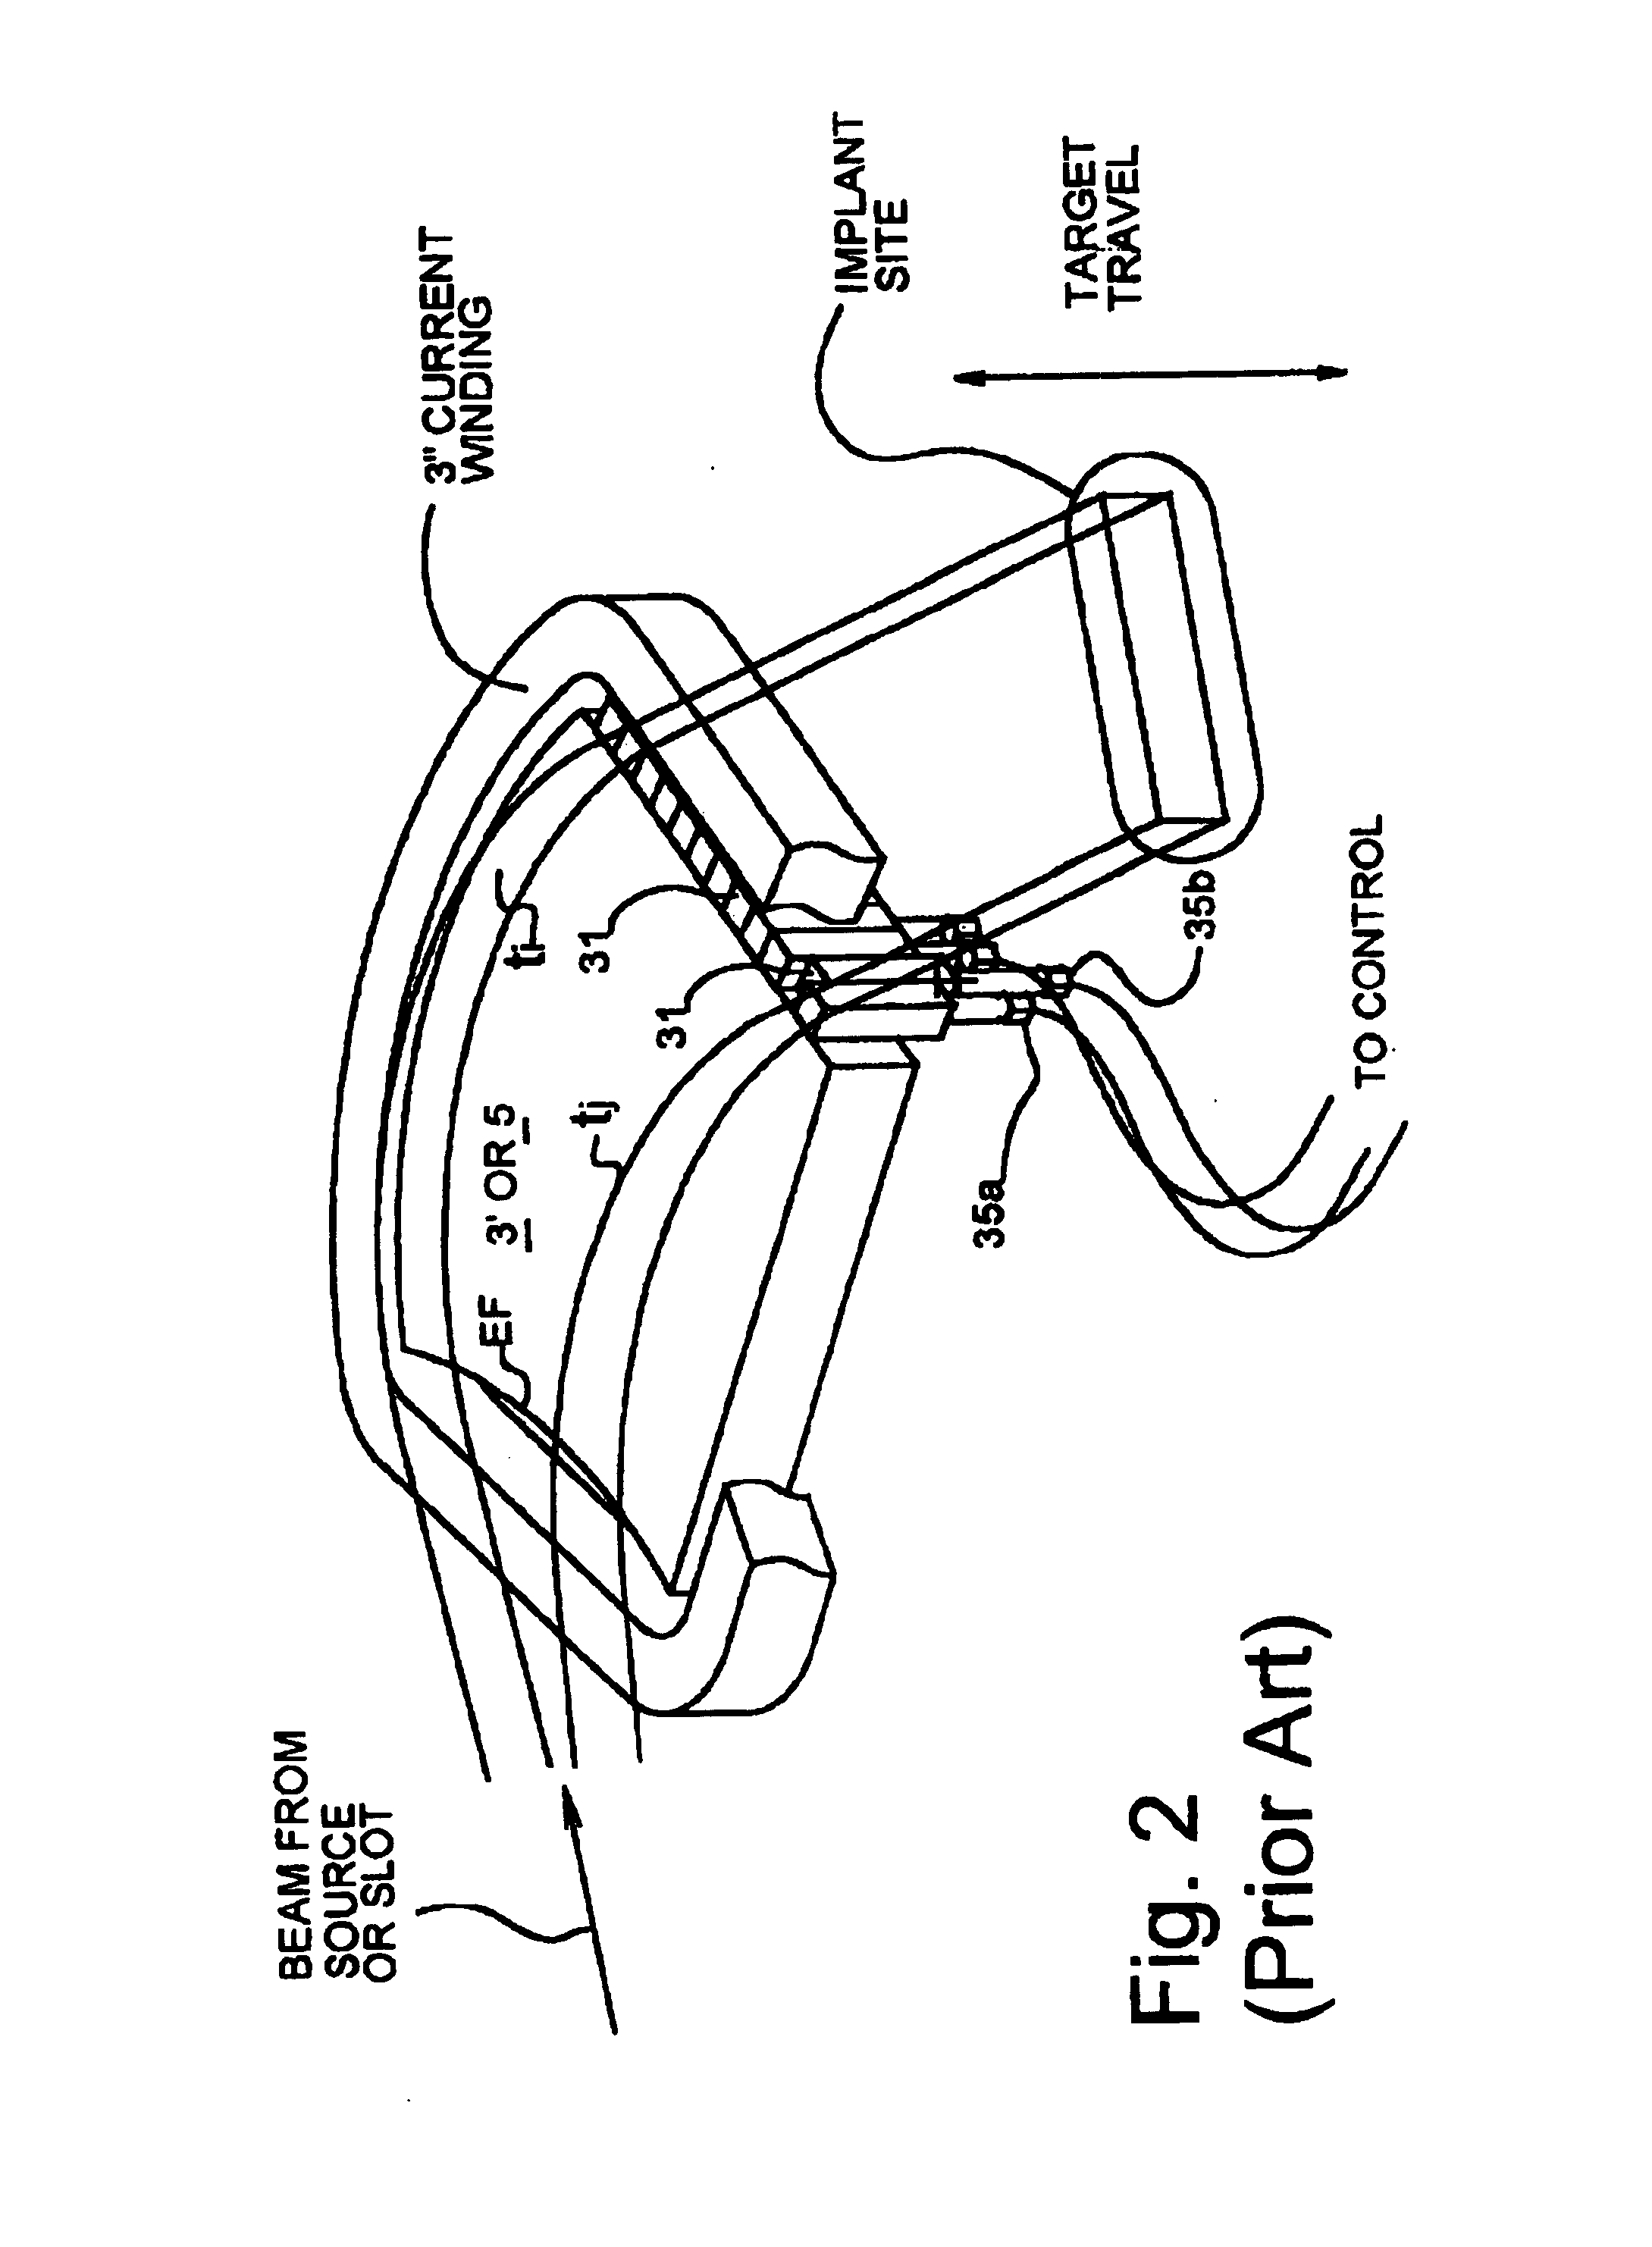 Method and fine-control collimator for accurate collimation and precise parallel alignment of scanned ion beams